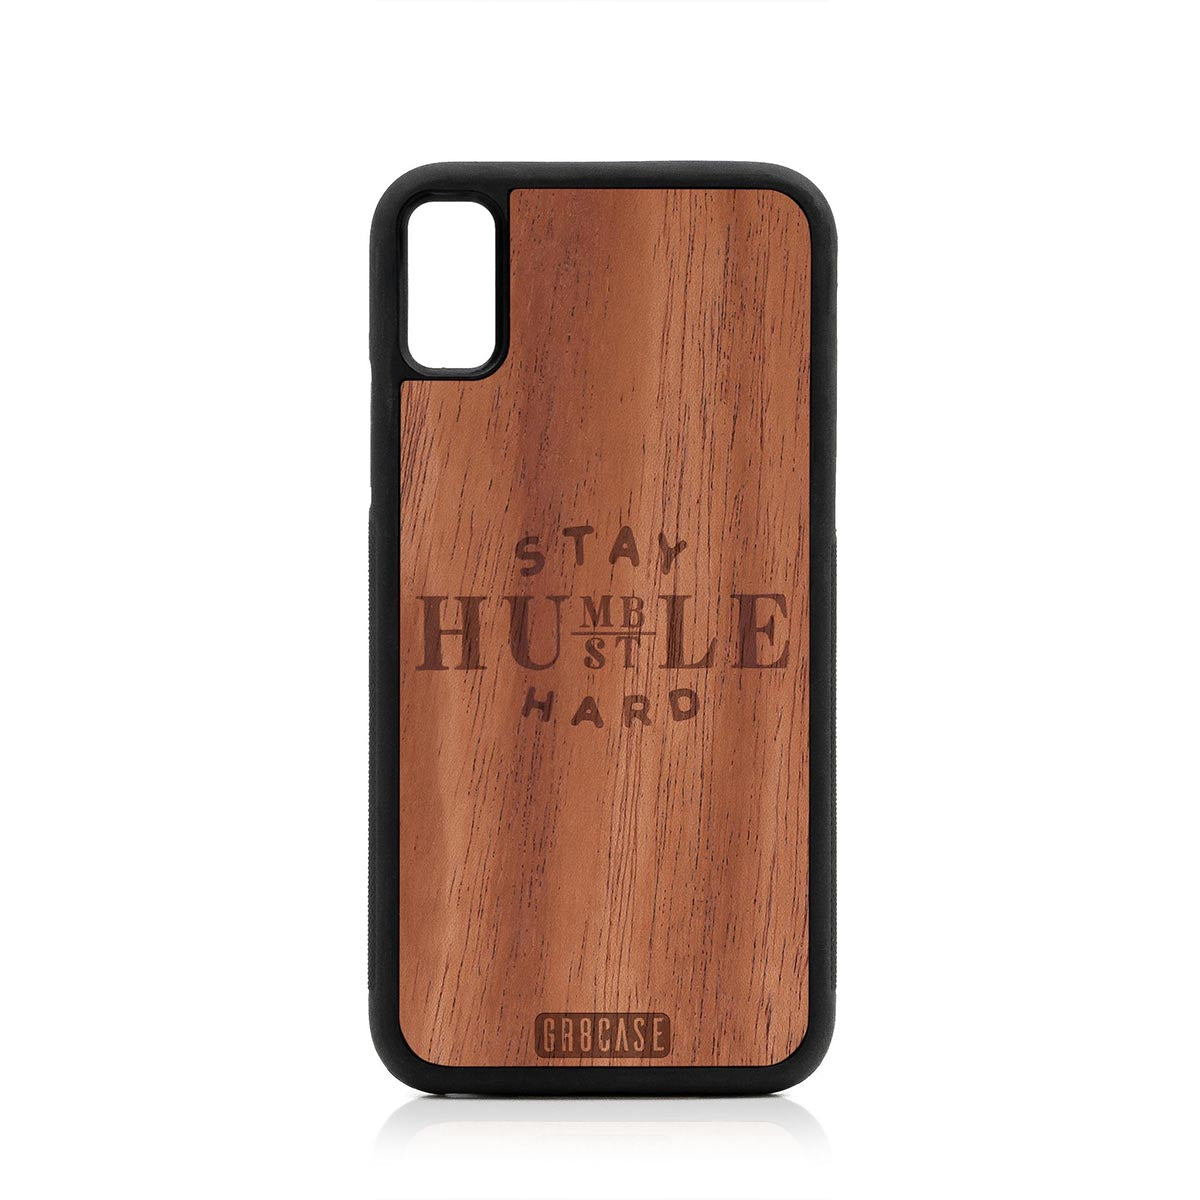 Stay Humble Hustle Hard Design Wood Case For iPhone X/XS by GR8CASE